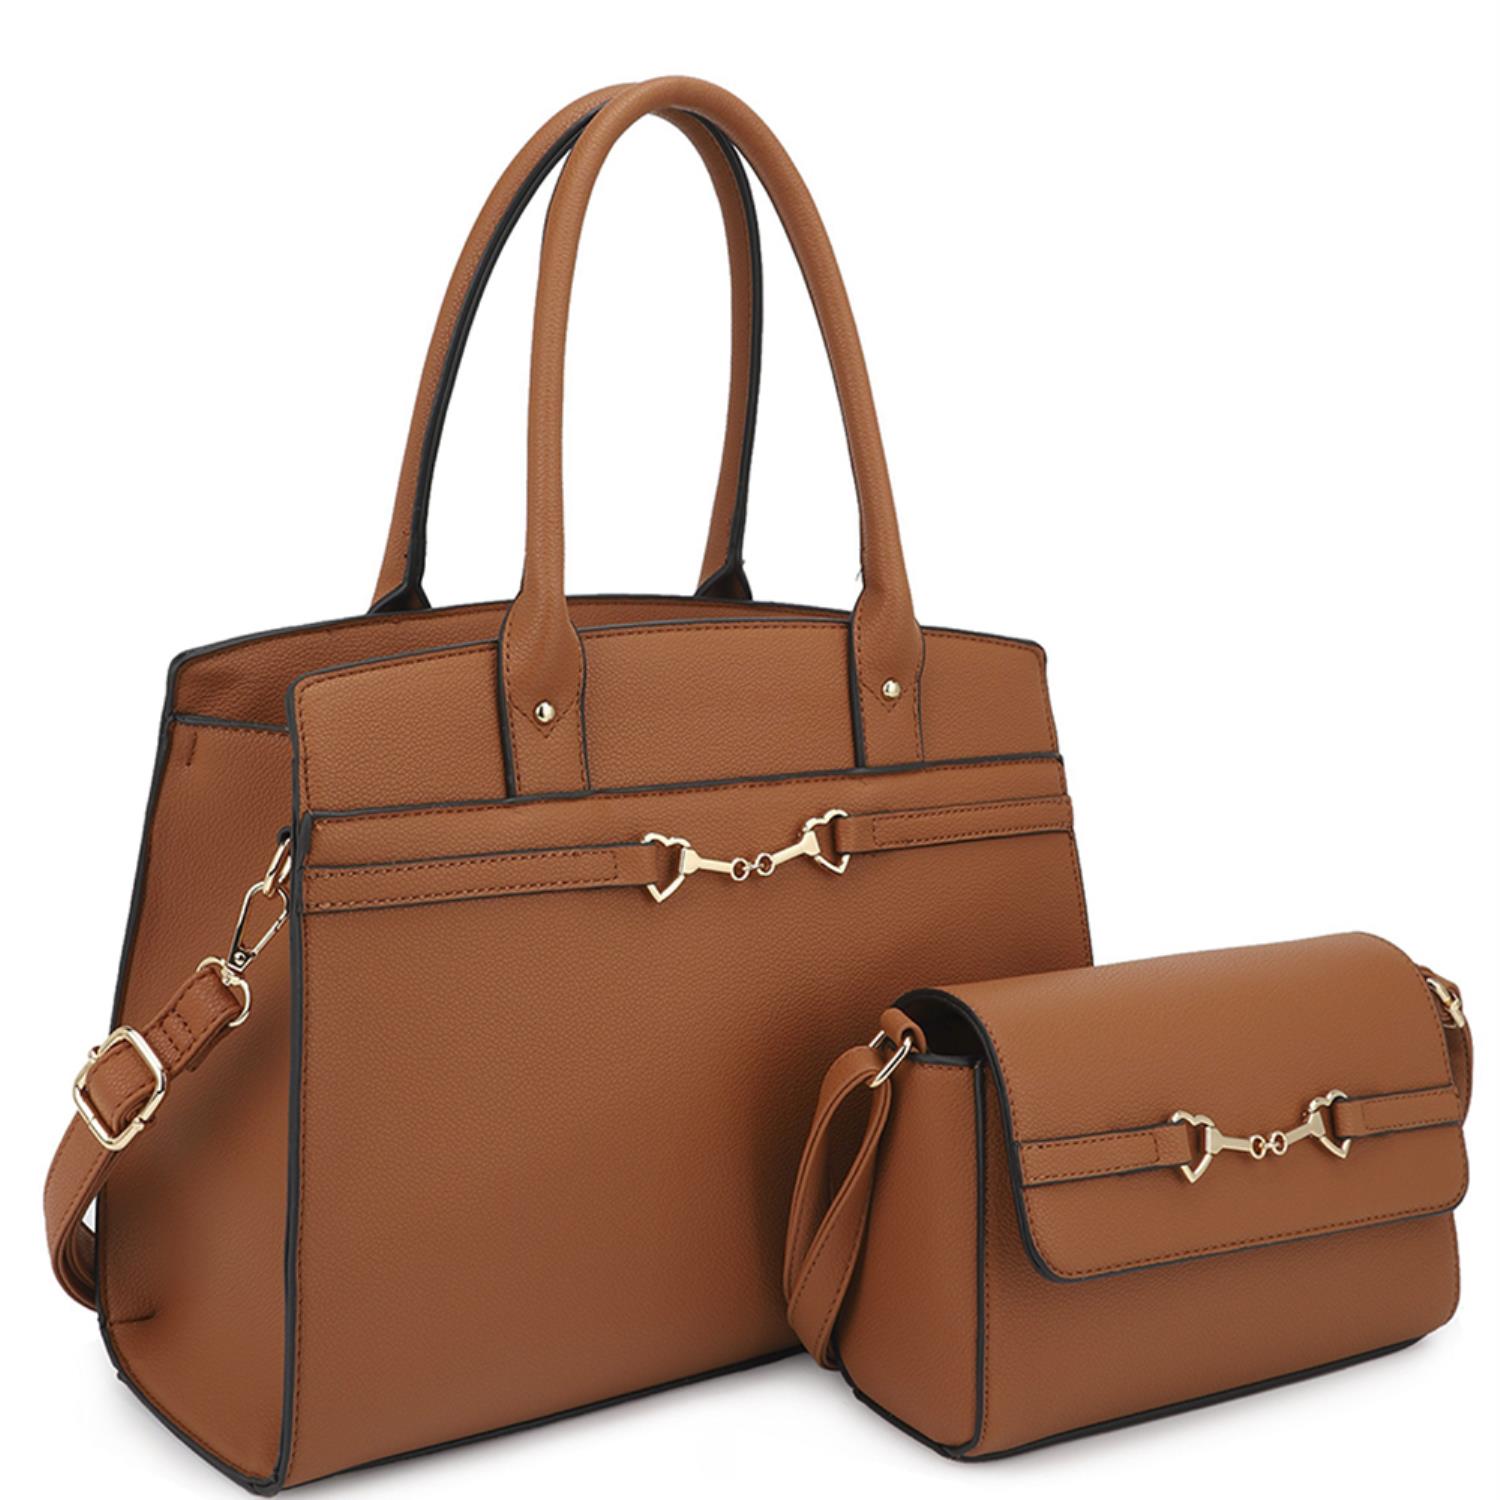 Brown - 2in1 Matching Design Handle Satchel With Crossbody Bags for Women - 5 colors - handbag at TFC&H Co.